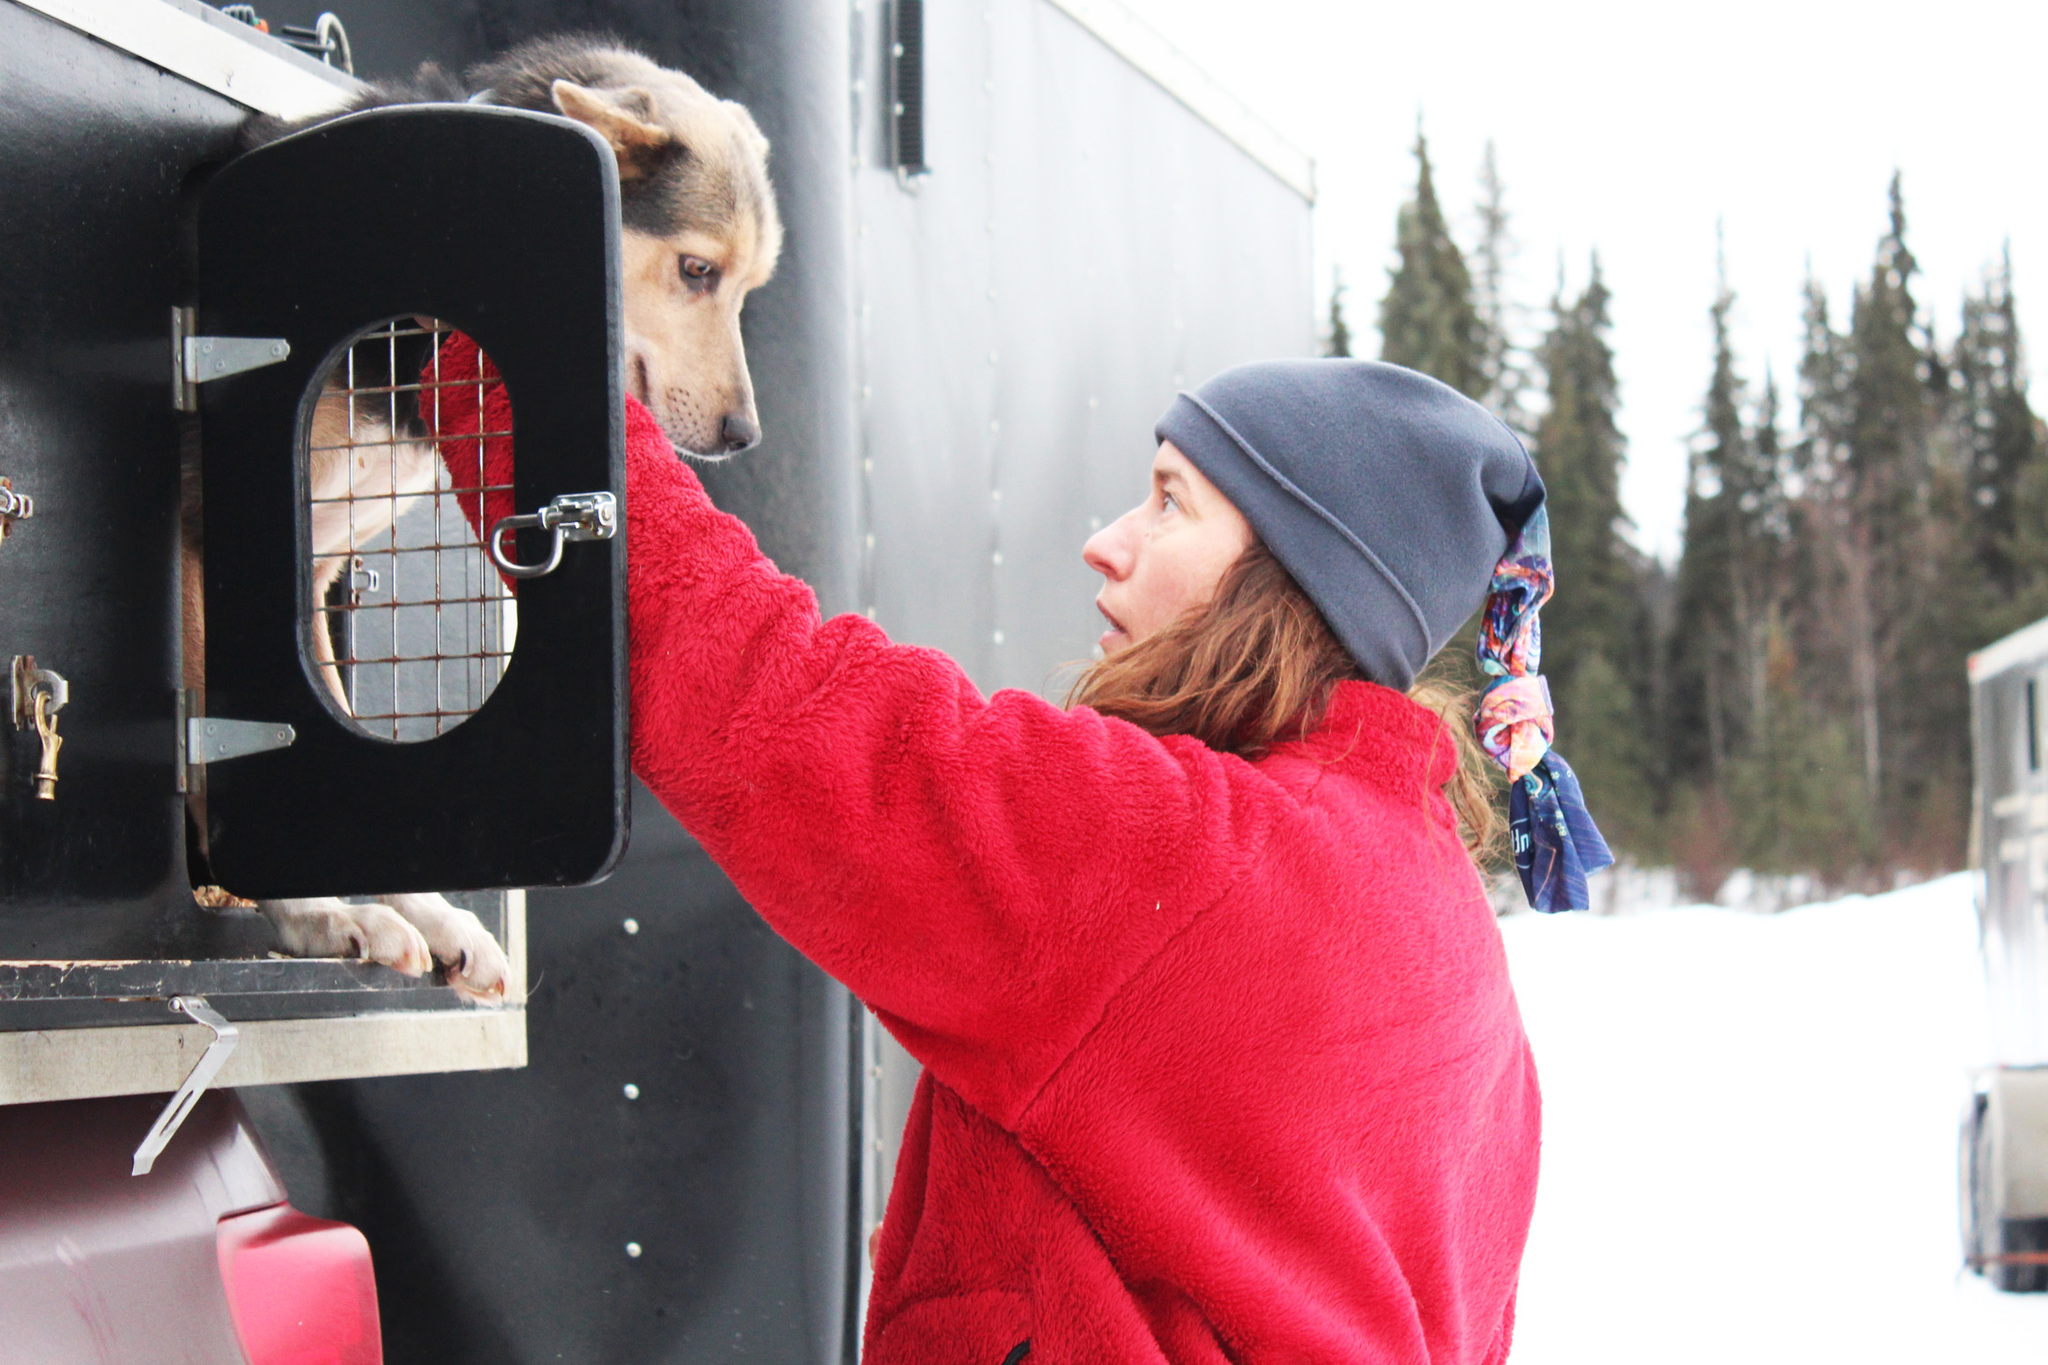 Kristin Bacon removes a sled dog named Willow from a truck in preparation for a veterinary check Friday, Jan. 27, 2017 outside the Soldotna Regional Sports Complex, ahead of the long-awaited Tustumena 200 Sled Dog Race. The race, which kicks off in Kasilof and weaves 200 miles through the Caribou Hills, has been canceled the last few years due to lack of snow on the Kenai Peninsula. (Megan Pacer/Peninsula Clarion)